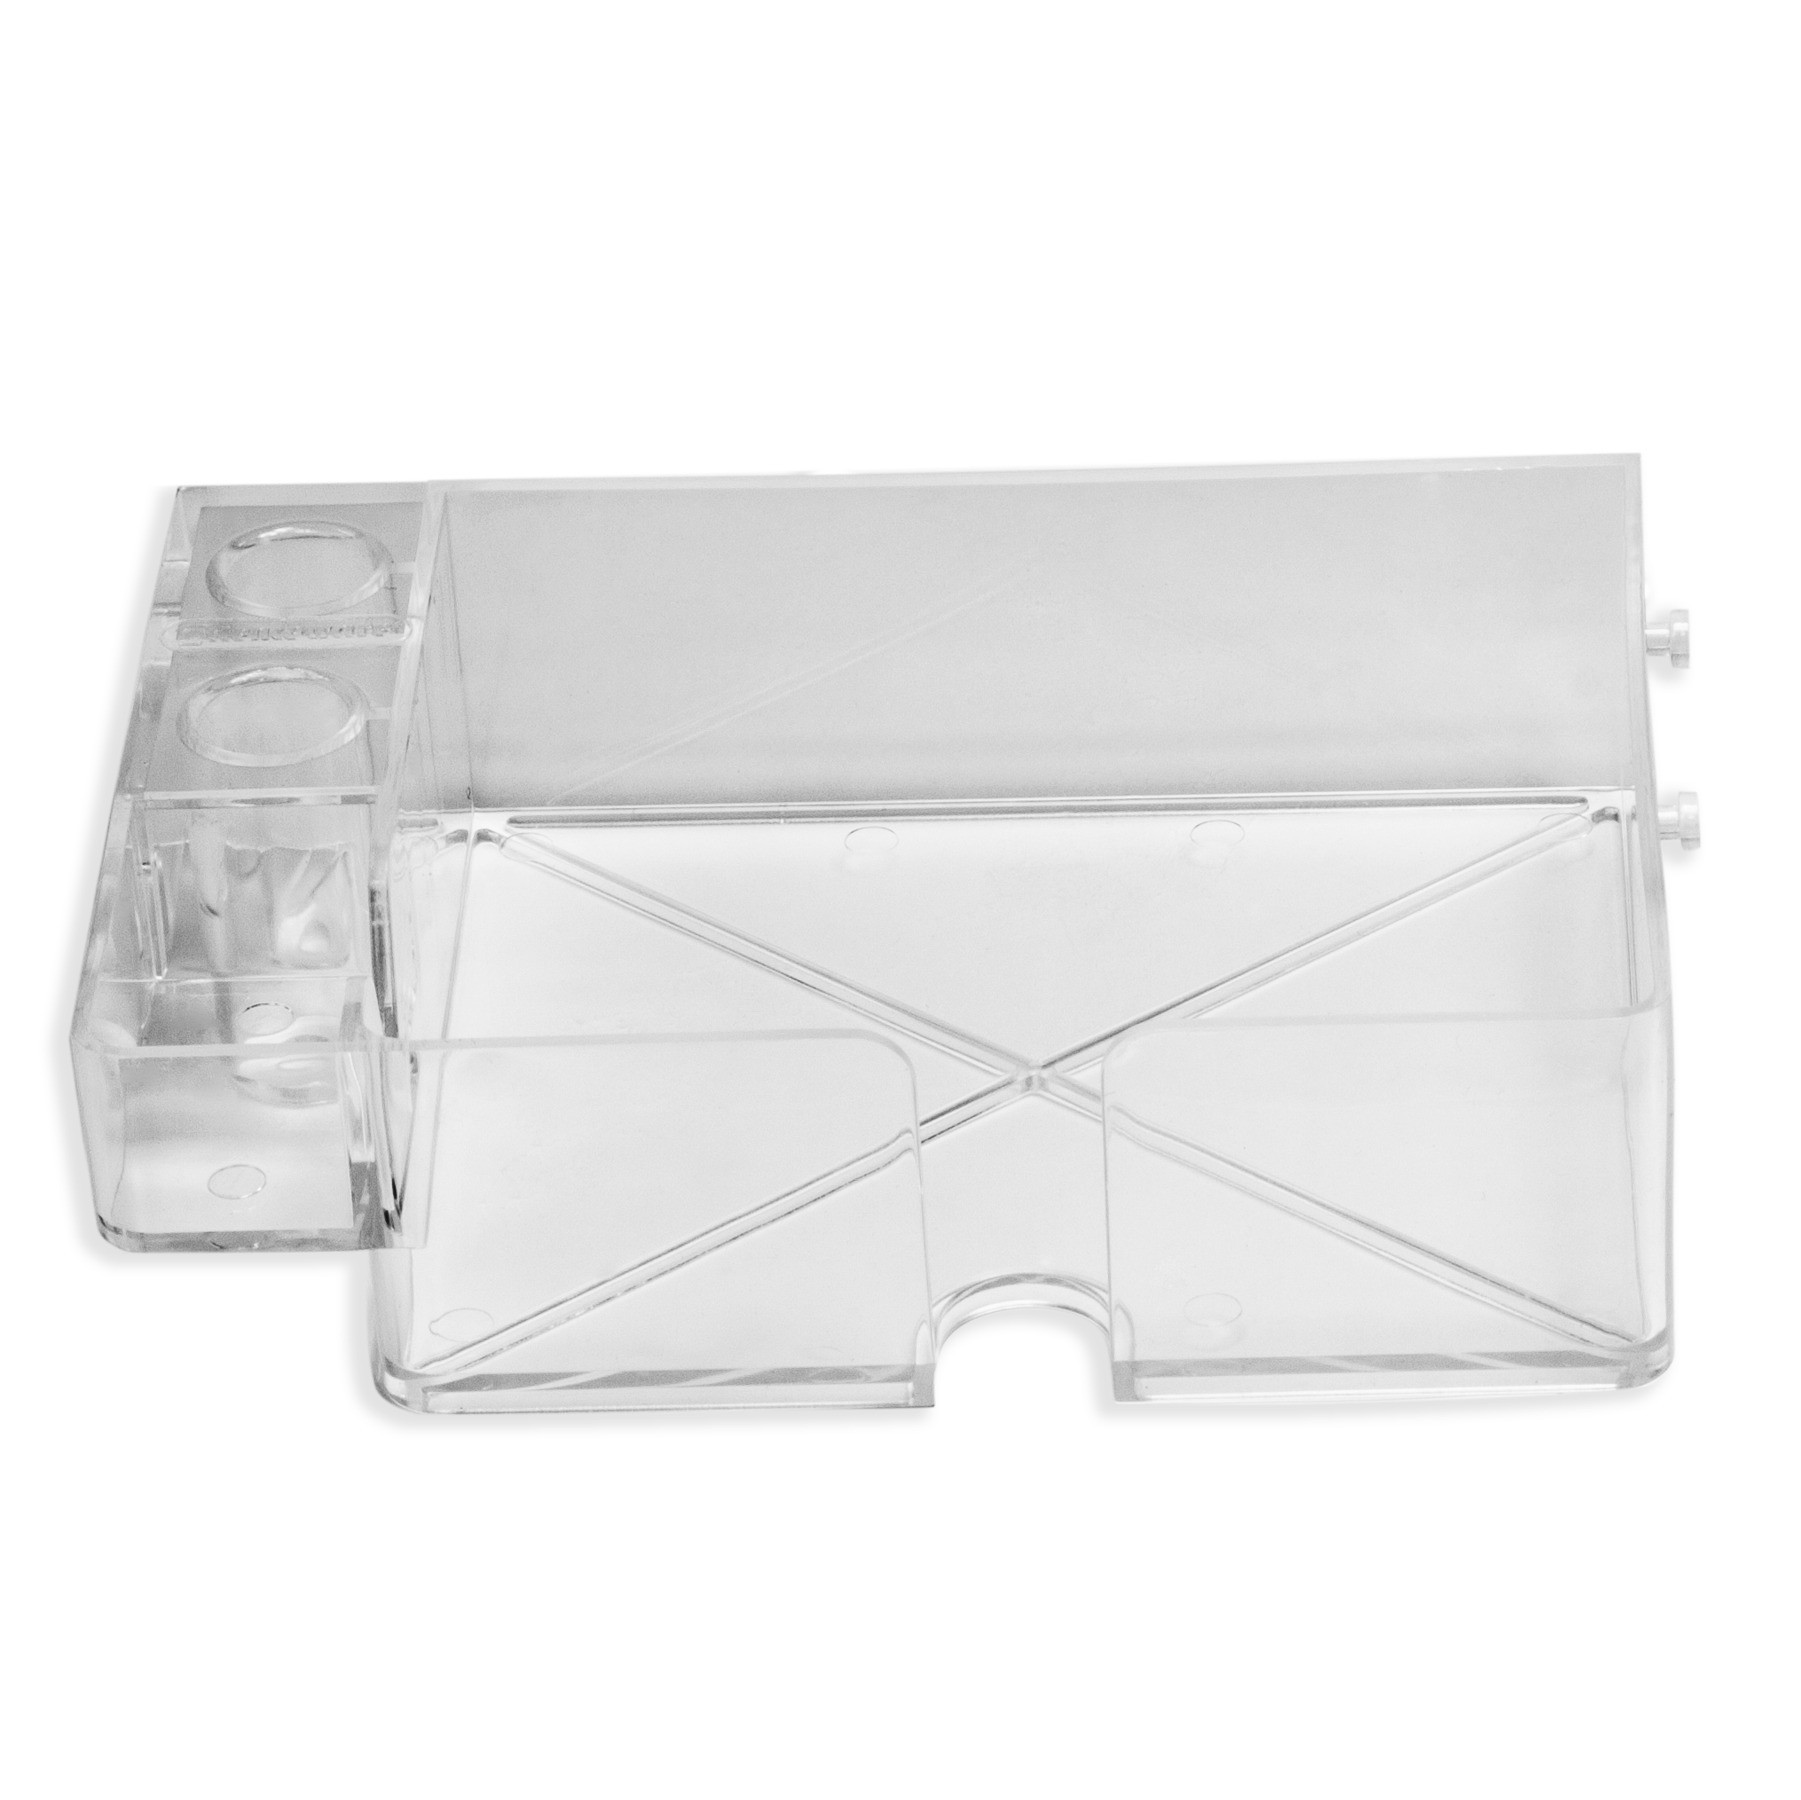 SP Bel-Art Utility Tray for PiRack Pipettor Holder System